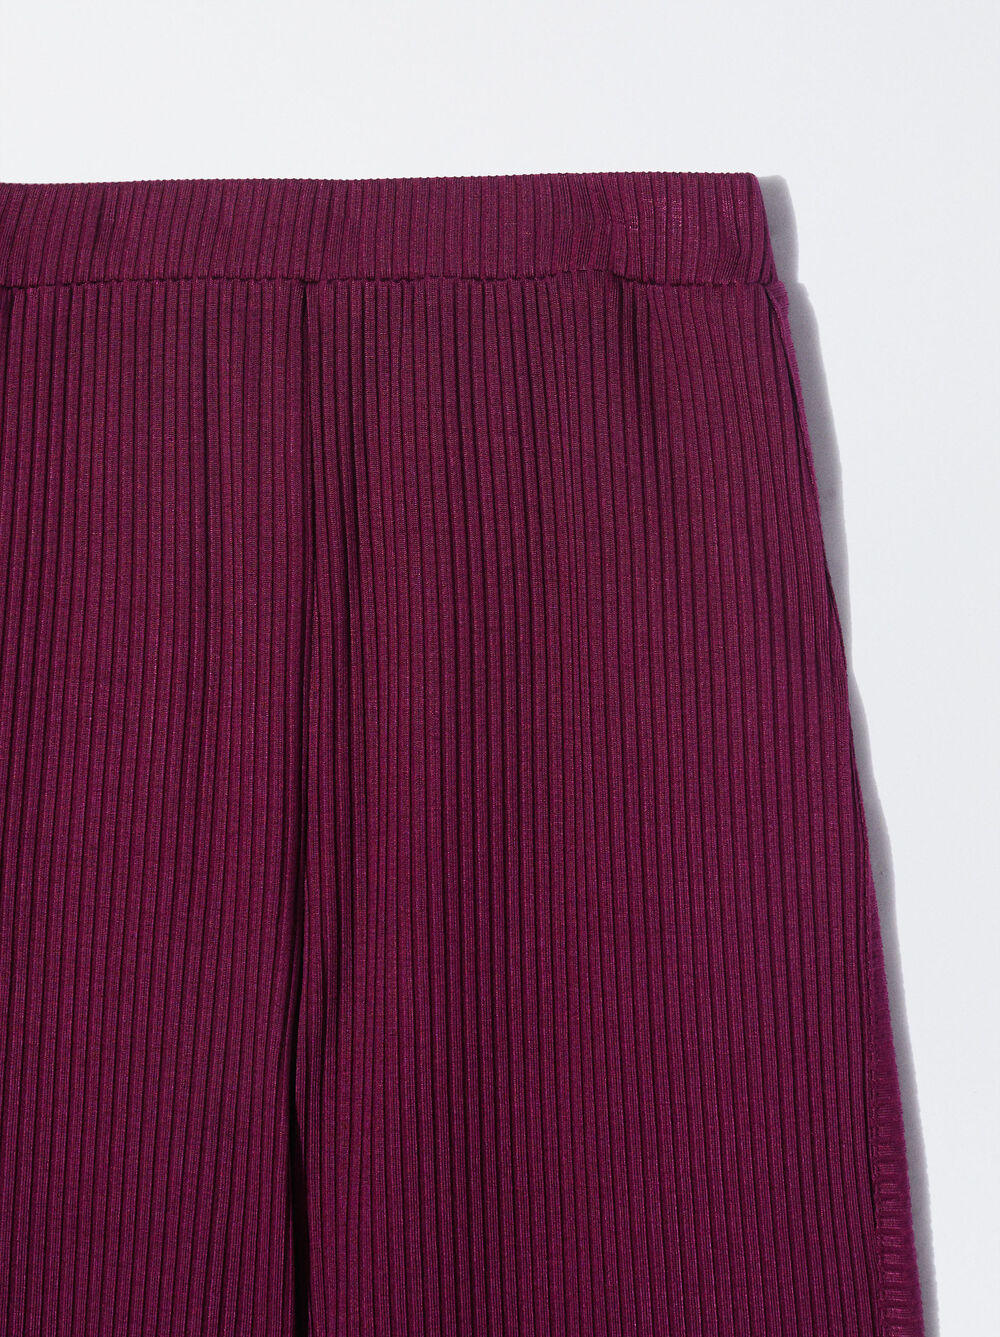 Trousers With Elastic Waistband